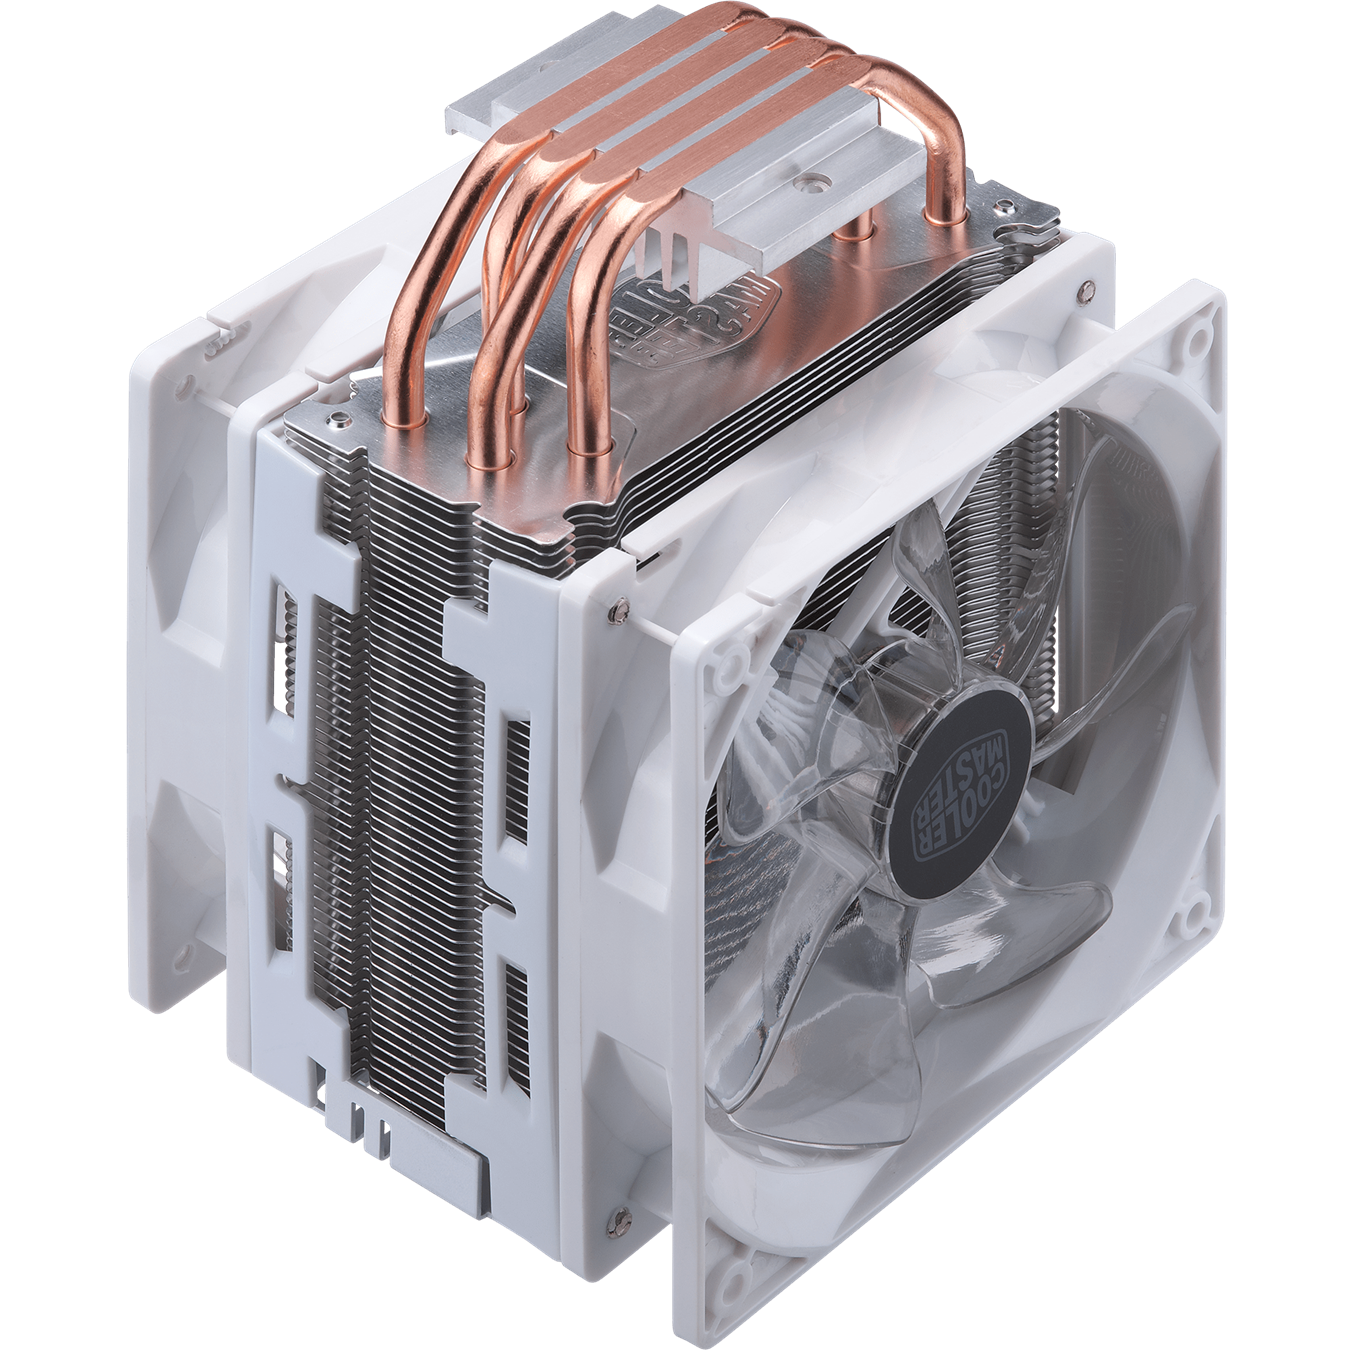 212 LED Turbo White Edition CPU Cooler Cooler Master